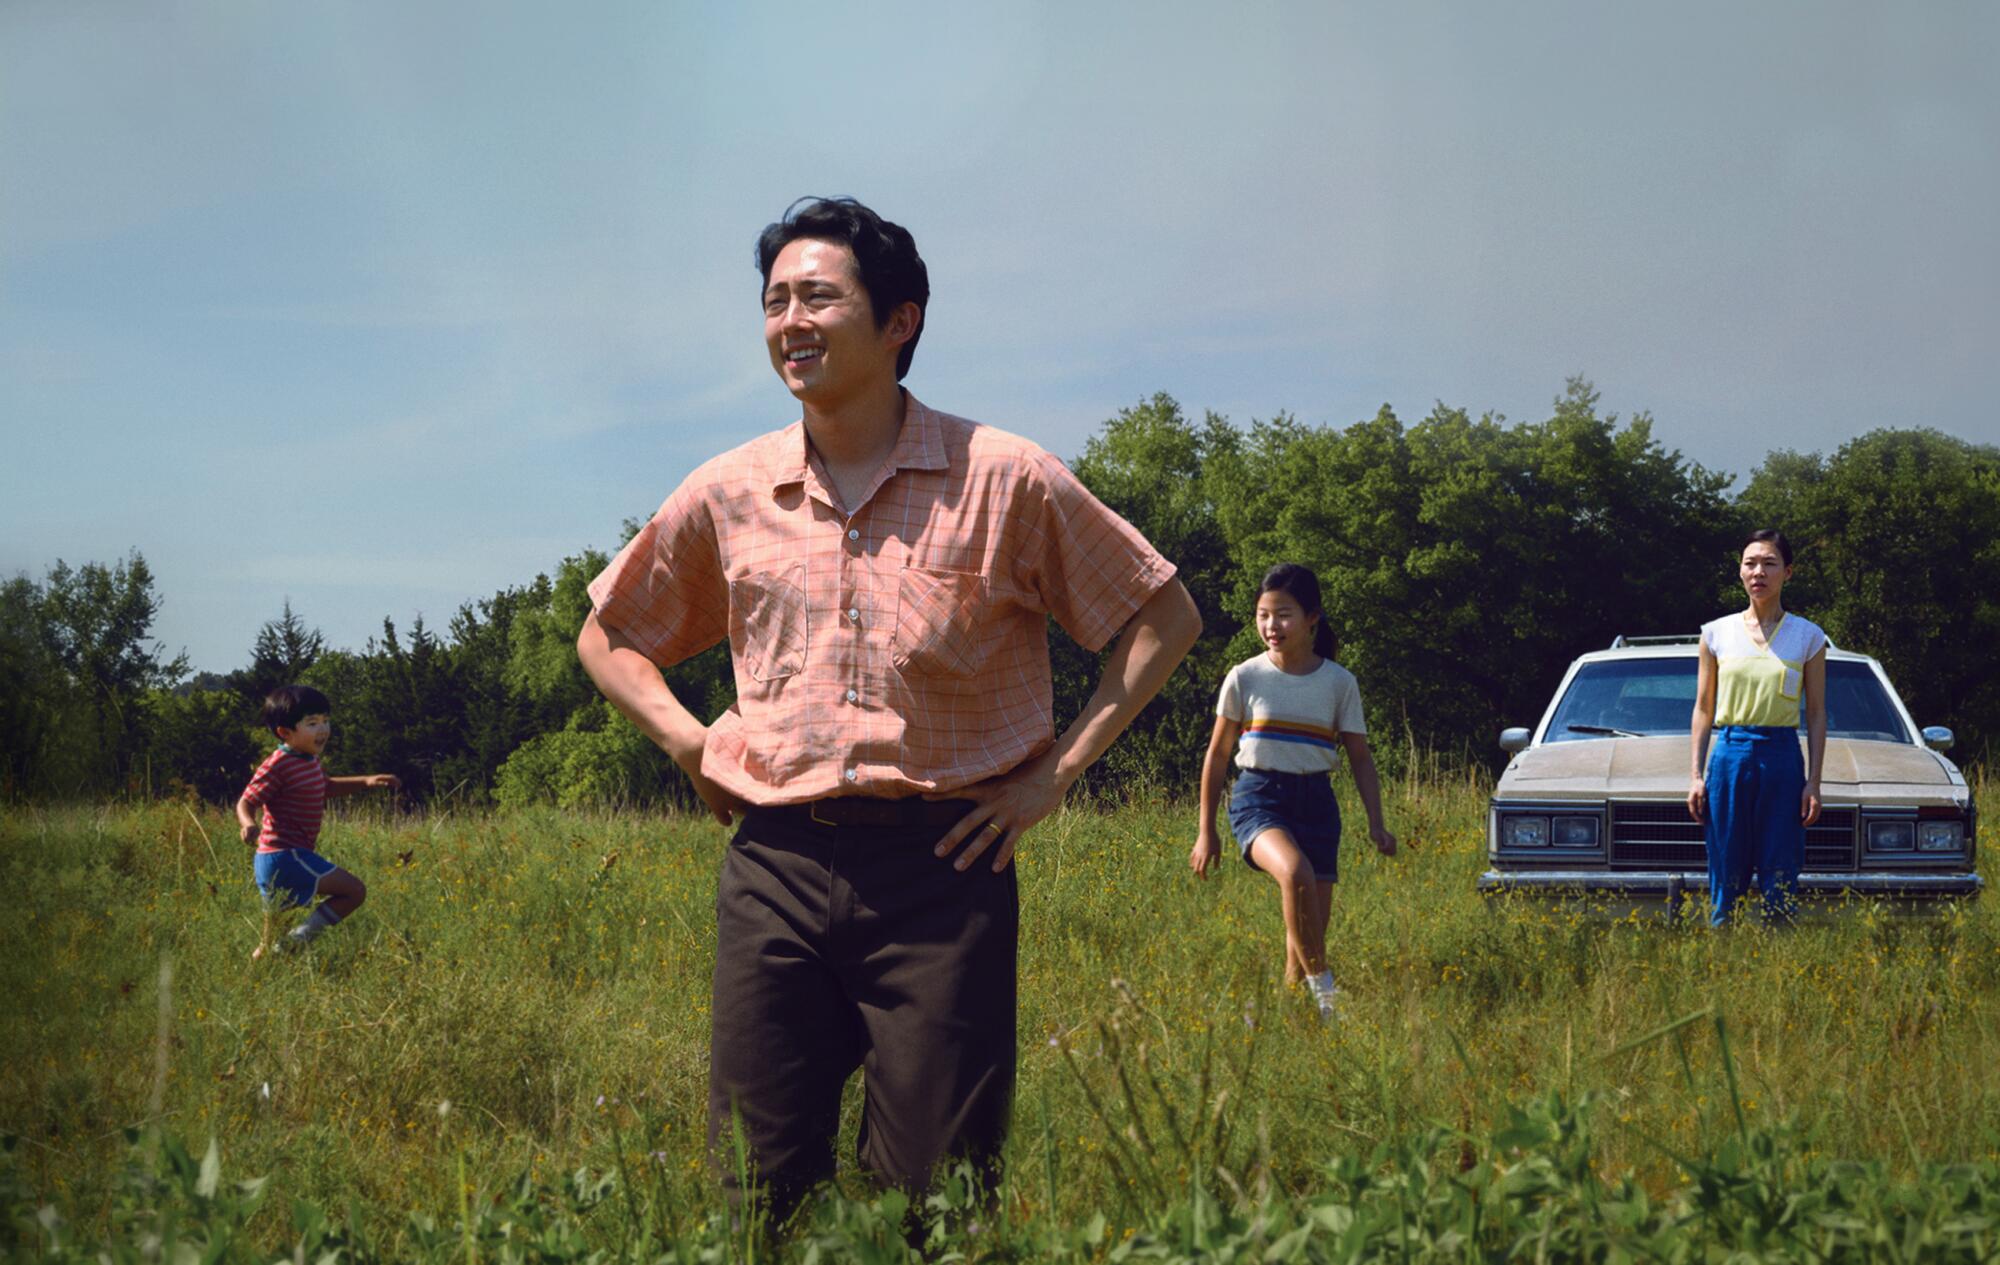 Steven Yeun as Jacob surveys his newly purchased farmland with his family in a scene from "Minari."